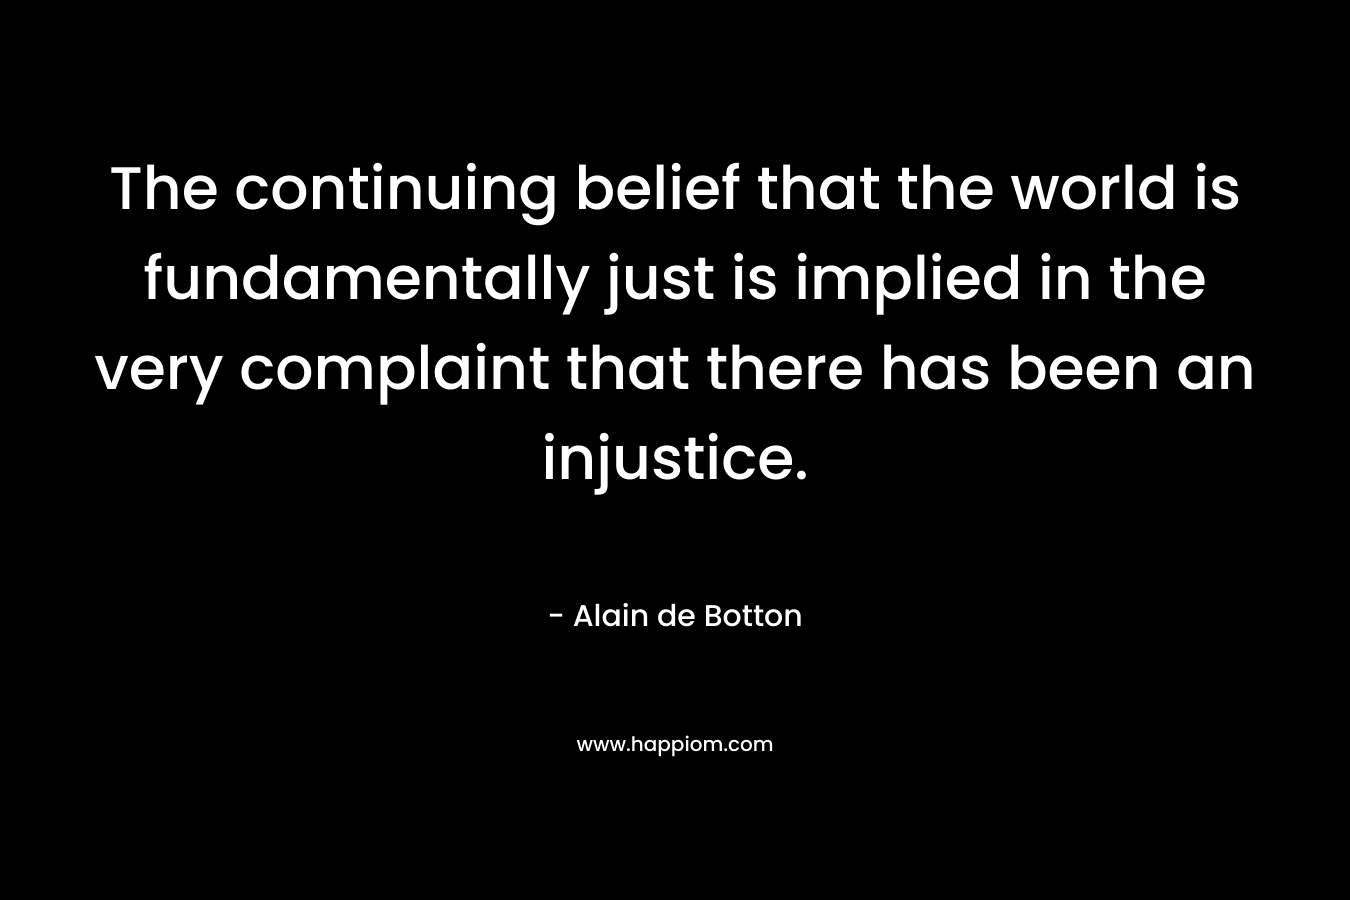 The continuing belief that the world is fundamentally just is implied in the very complaint that there has been an injustice. – Alain de Botton